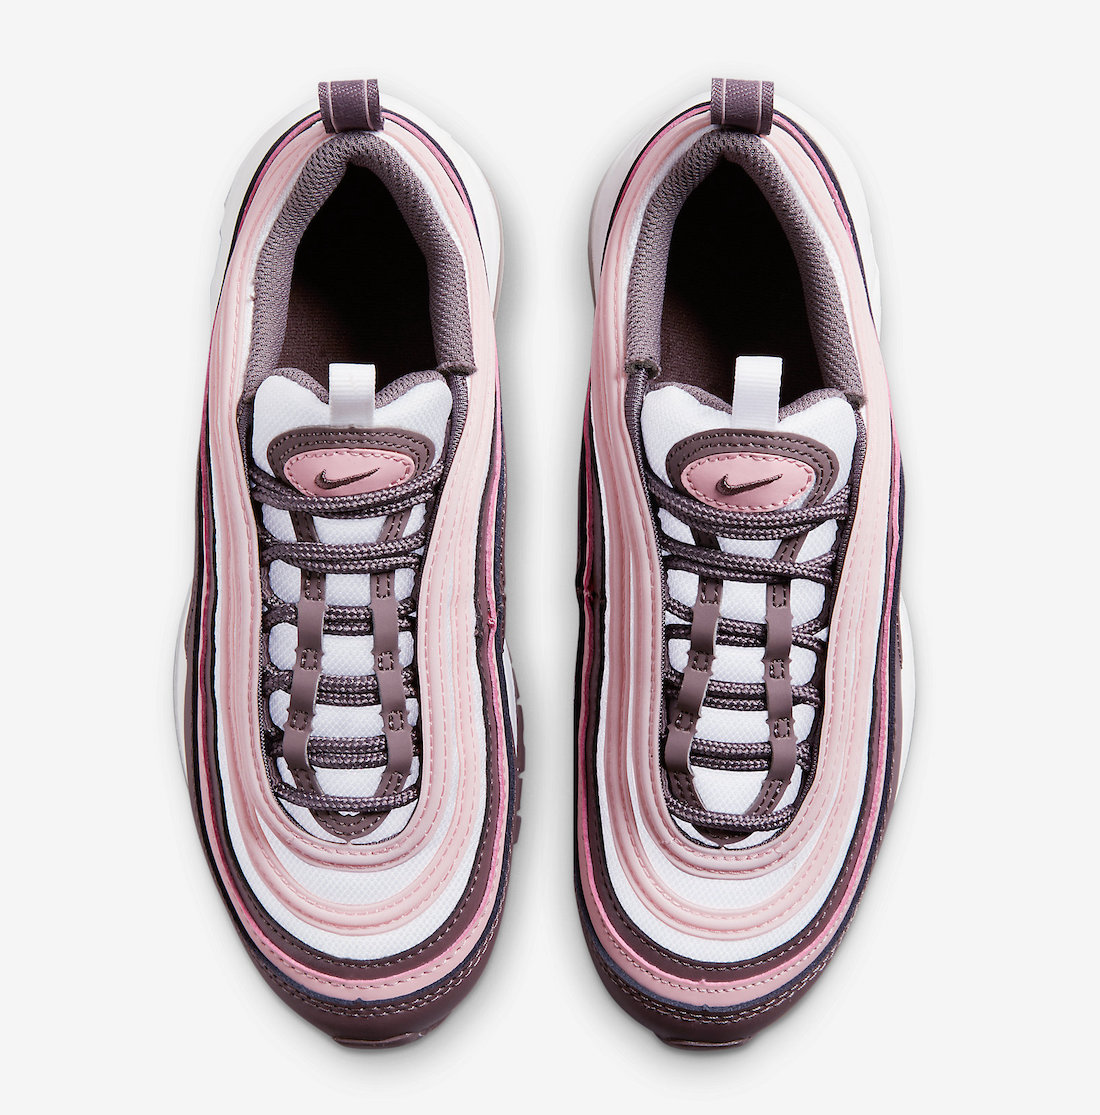 Nike Air Max 97 GS Violet Ore Pink Glaze 921522-200 Release Date